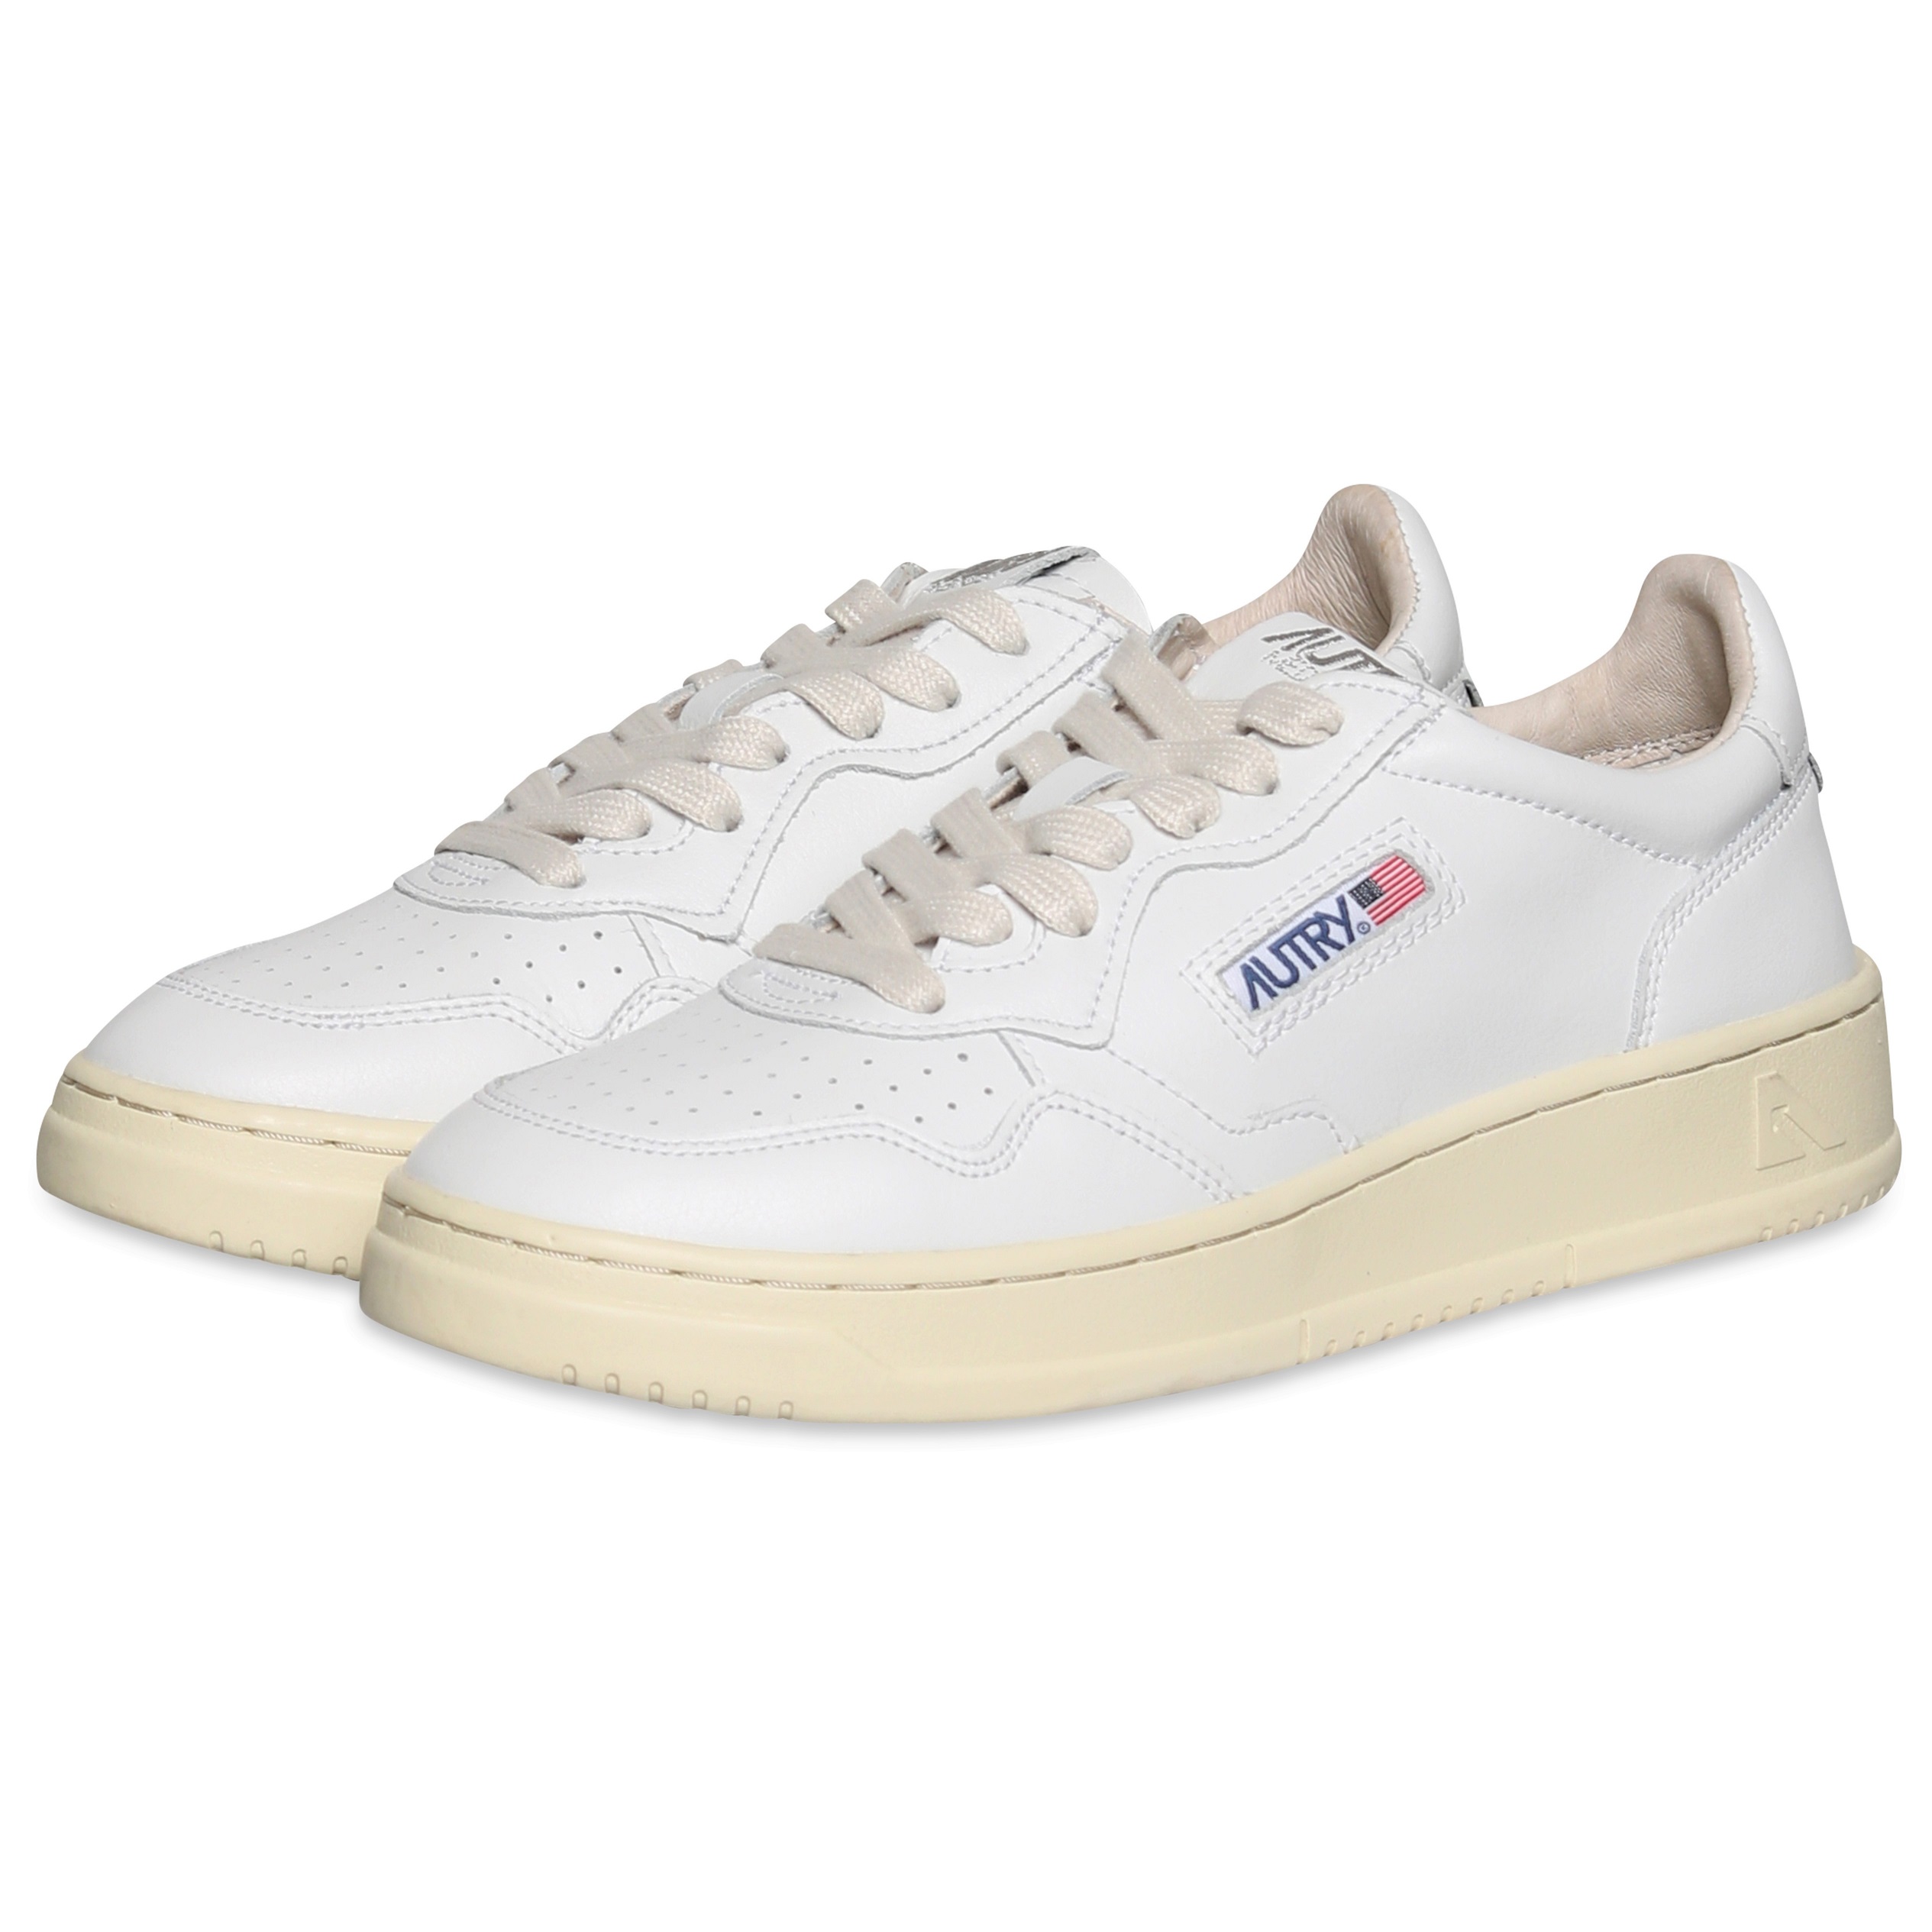 Autry Action Shoes Low Sneaker White/Draw Action 38